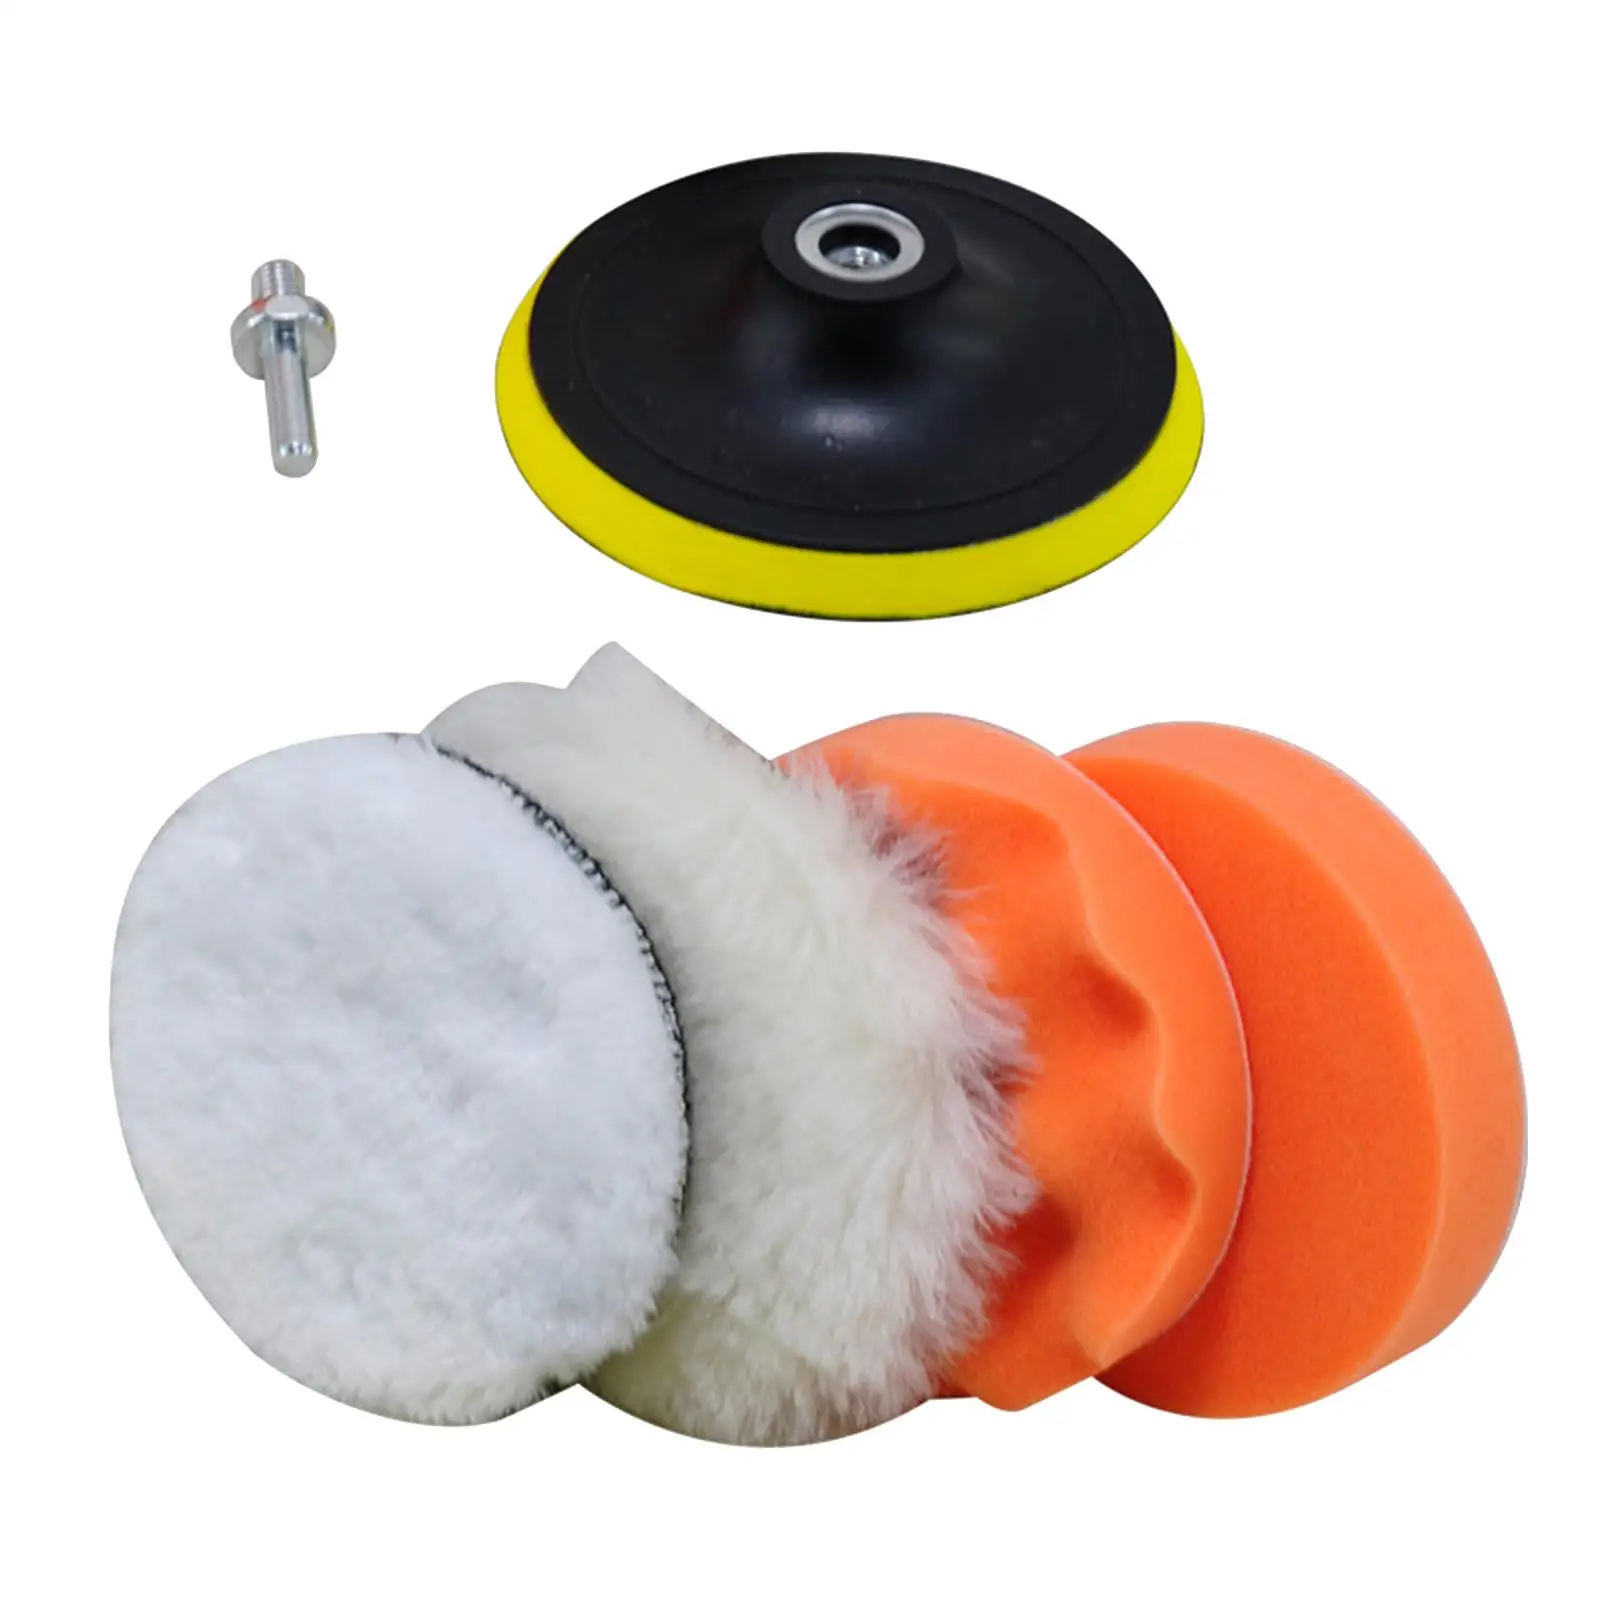 

6 Pieces Car Buffing Polishing Pads Polisher Pad for Dusting